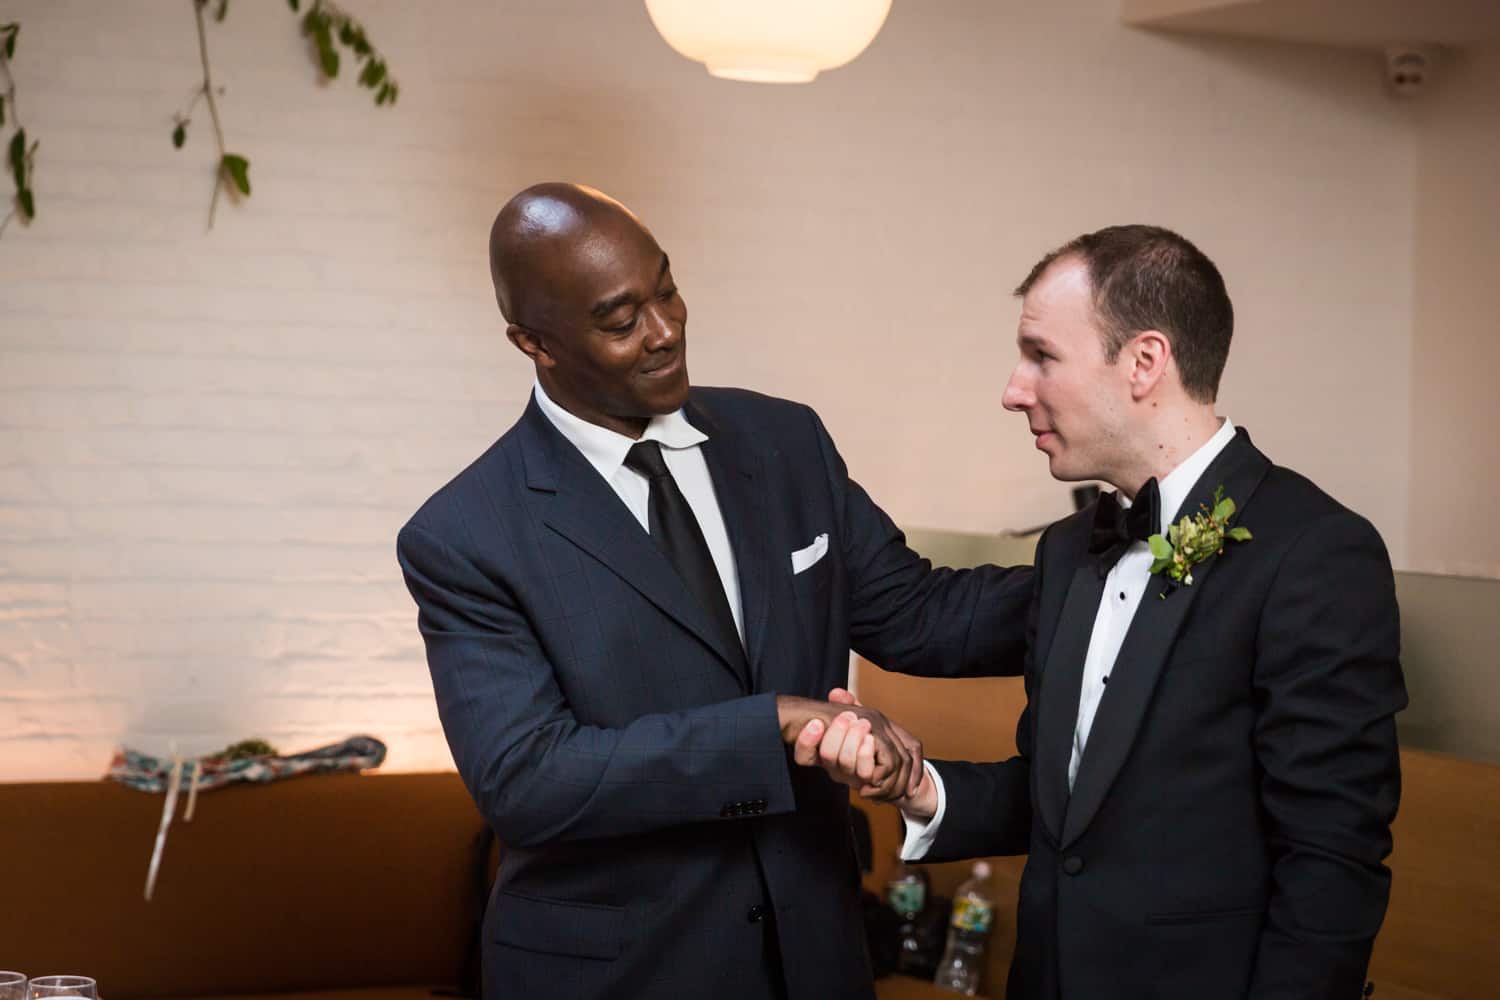 African American guest shaking hands with groom